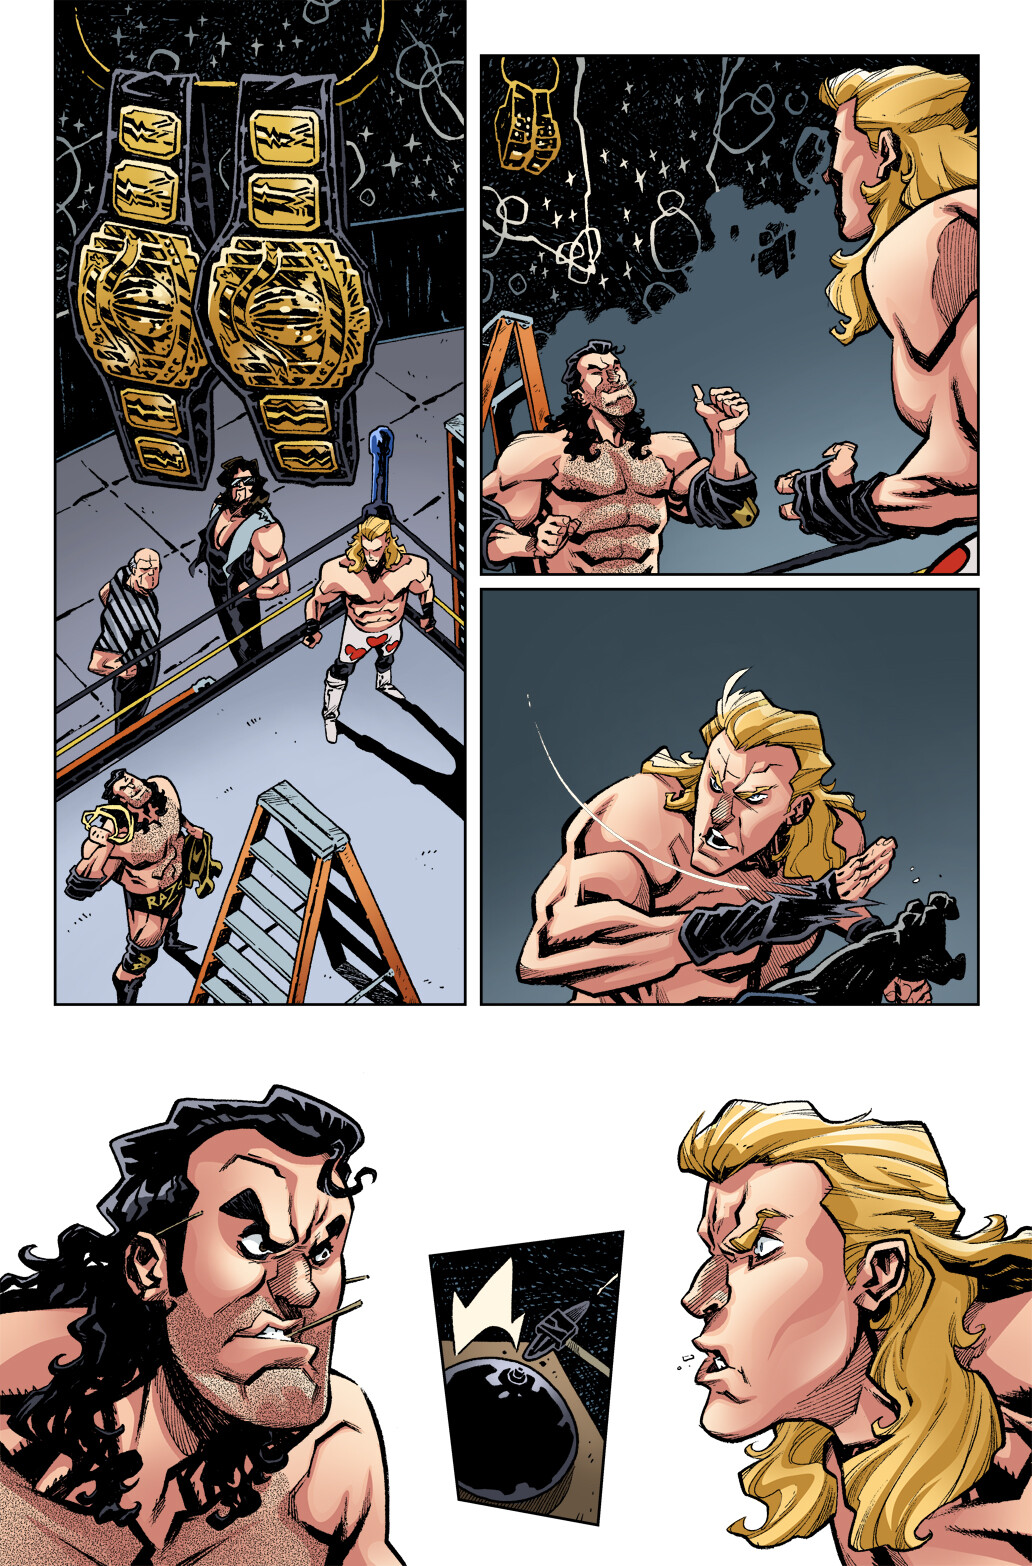 WWE Wrestlemania Special, page 2